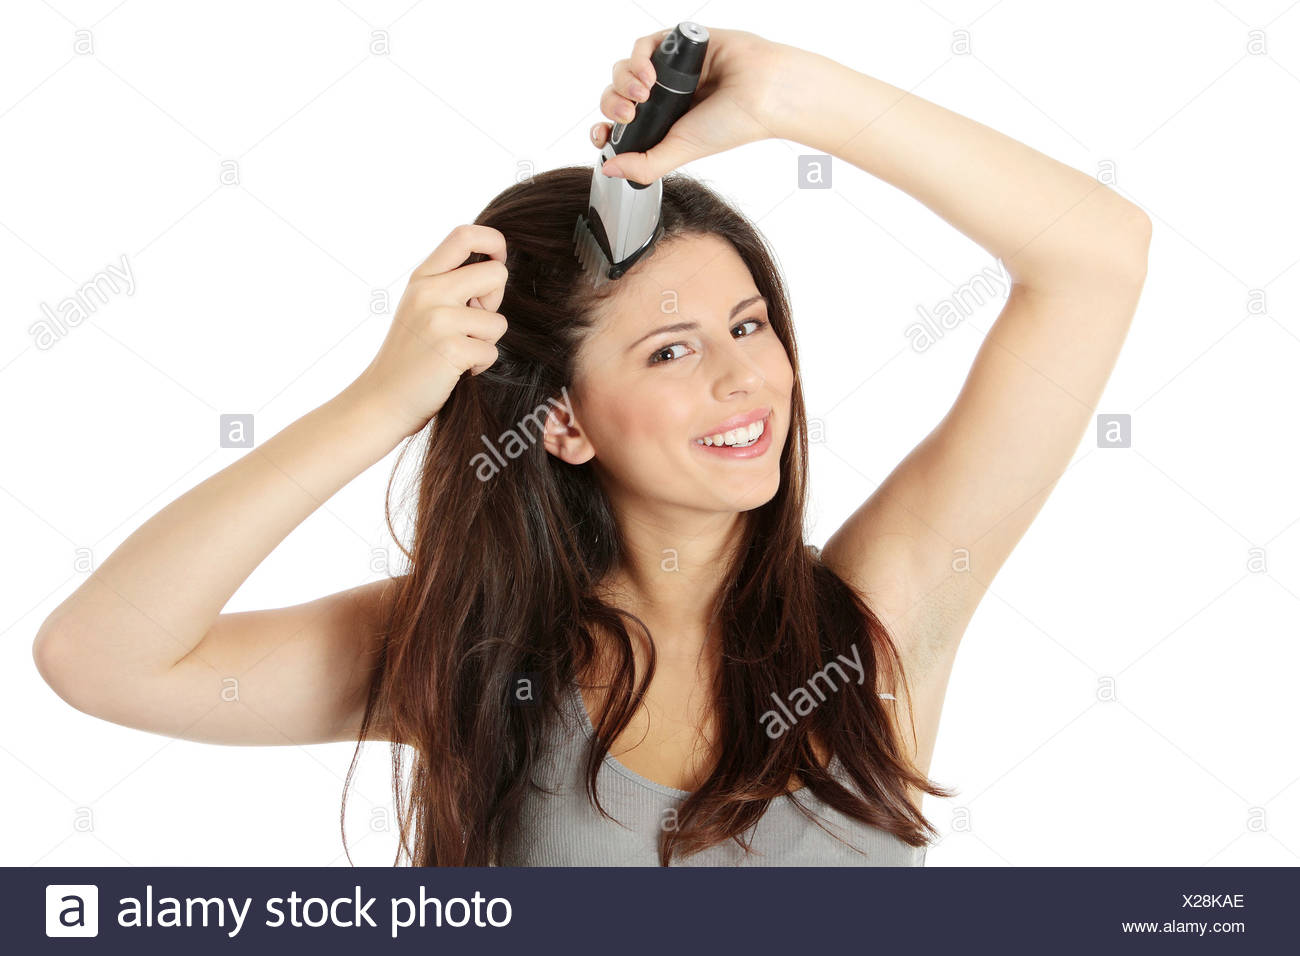 cutting a woman's hair with clippers